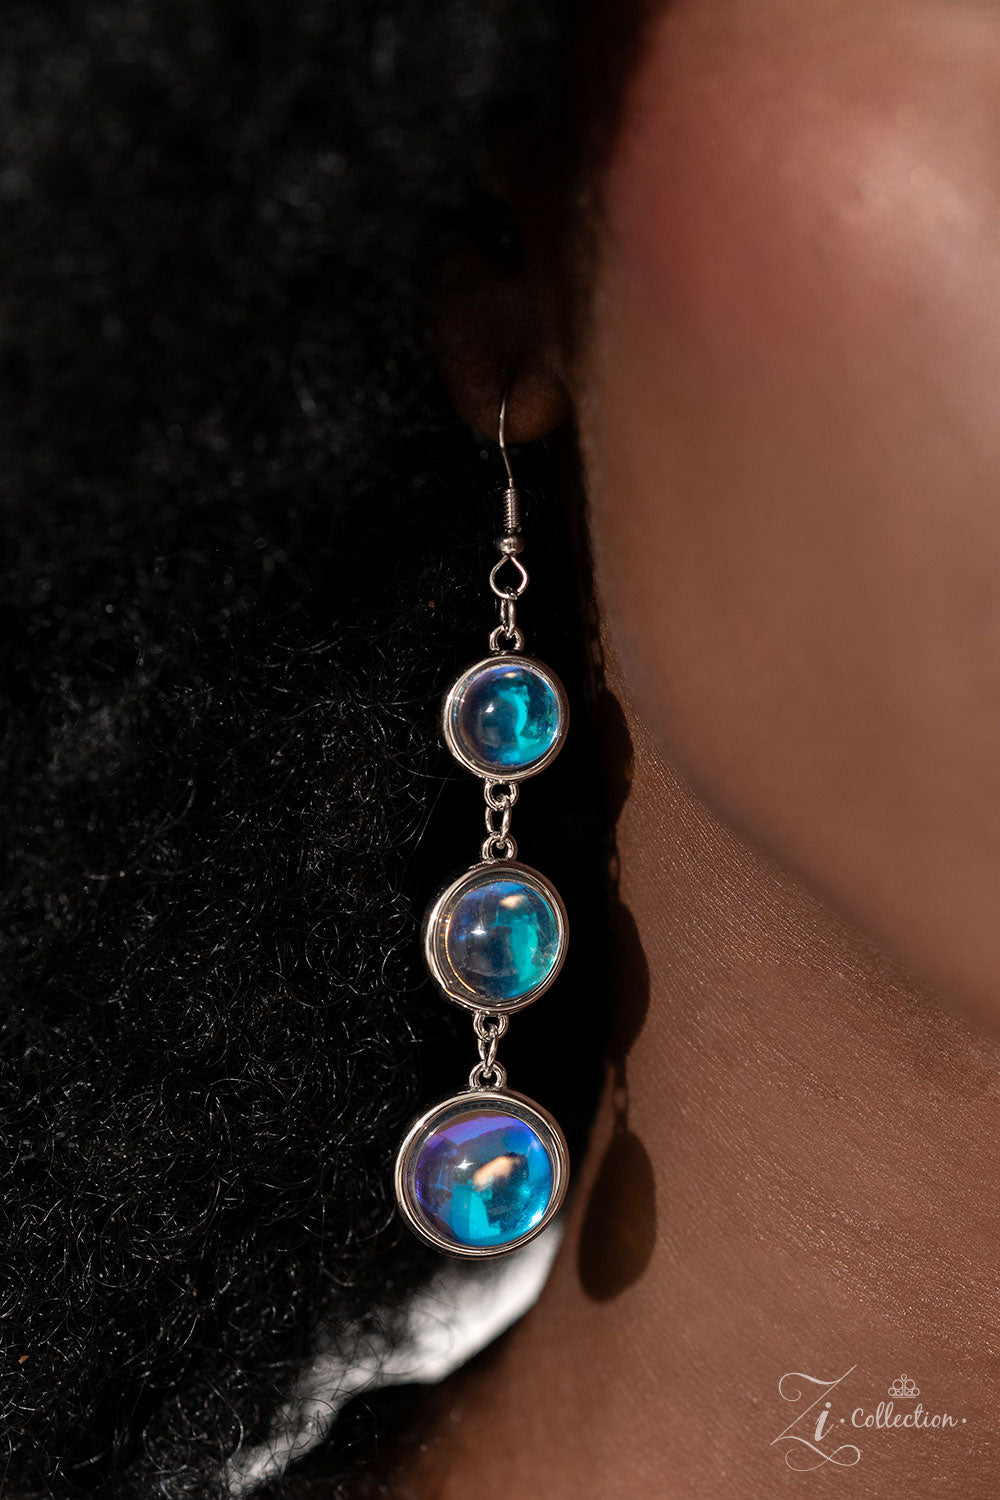 Paparazzi Accessories Hypnotic - Multi A dizzying display of silver hoops drapes across the chest in effervescent layers. Smooth, glassy beads, brushed in swirls of pastel iridescence, bubble up from some of the open, circular frames, further exaggerating